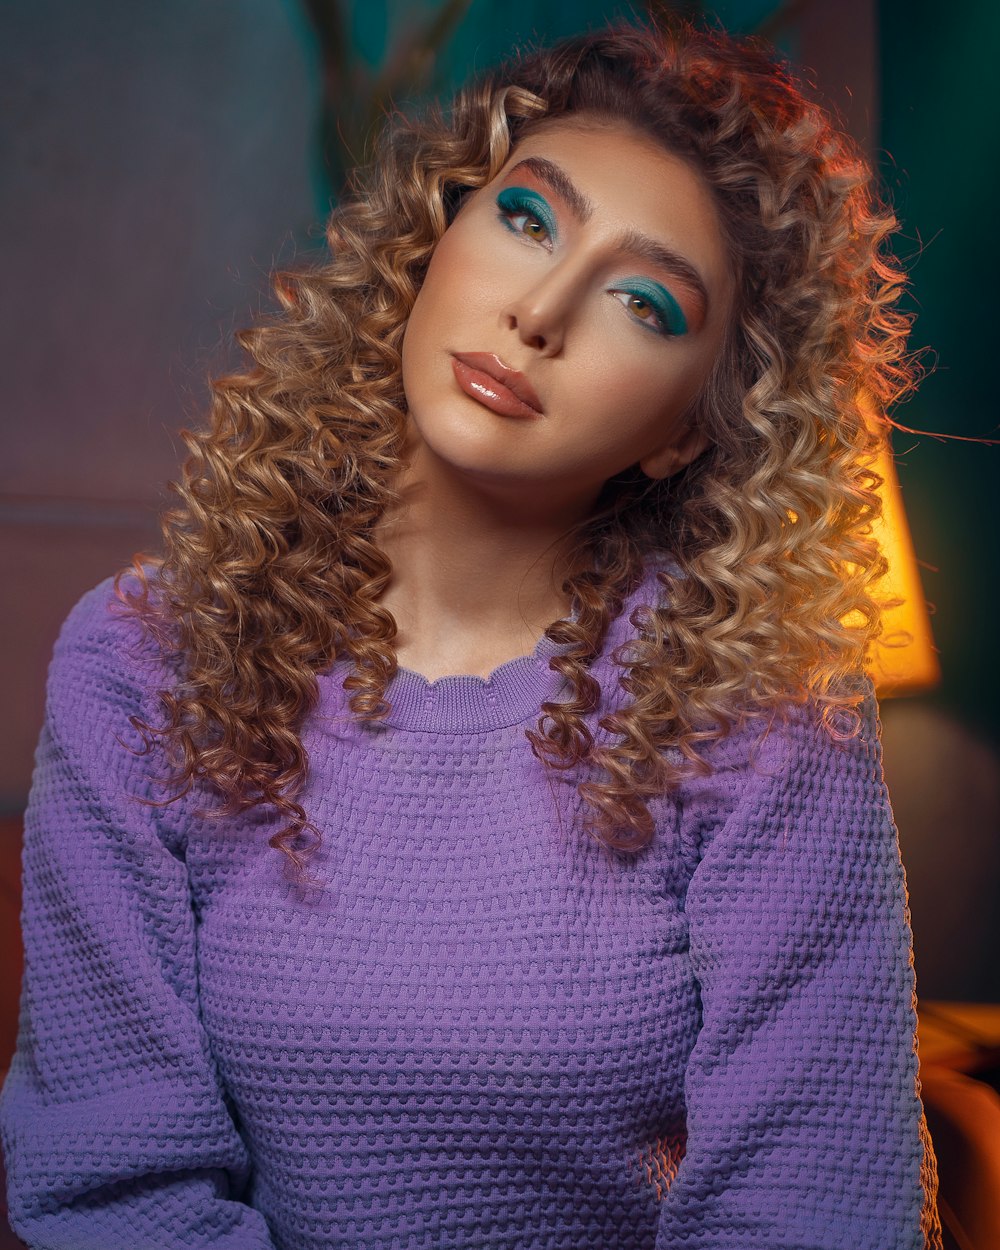 a woman with curly hair wearing a purple sweater